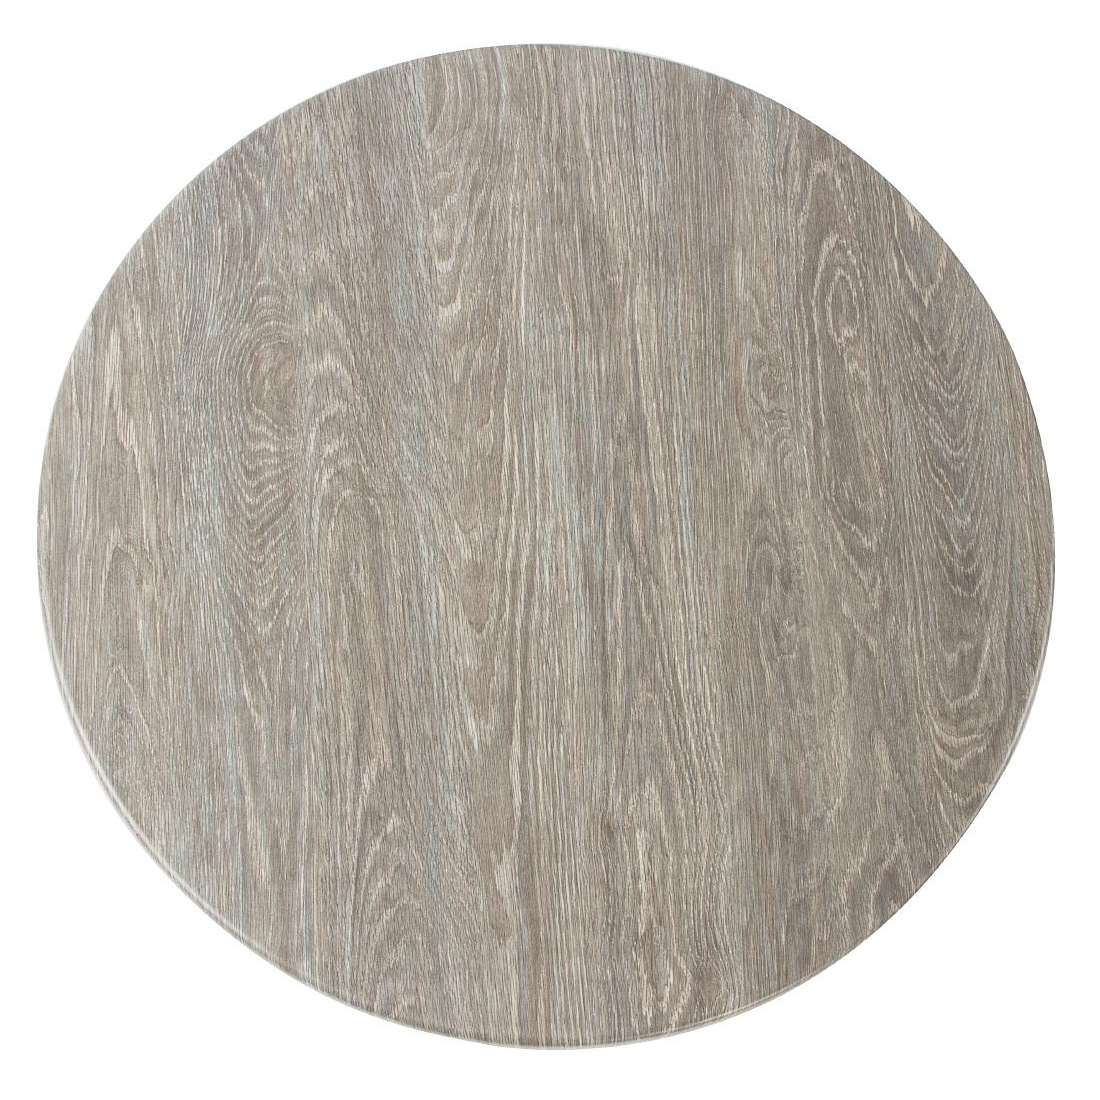 Werzalit Pre-drilled Round Table Top  Limed Oak 800mm